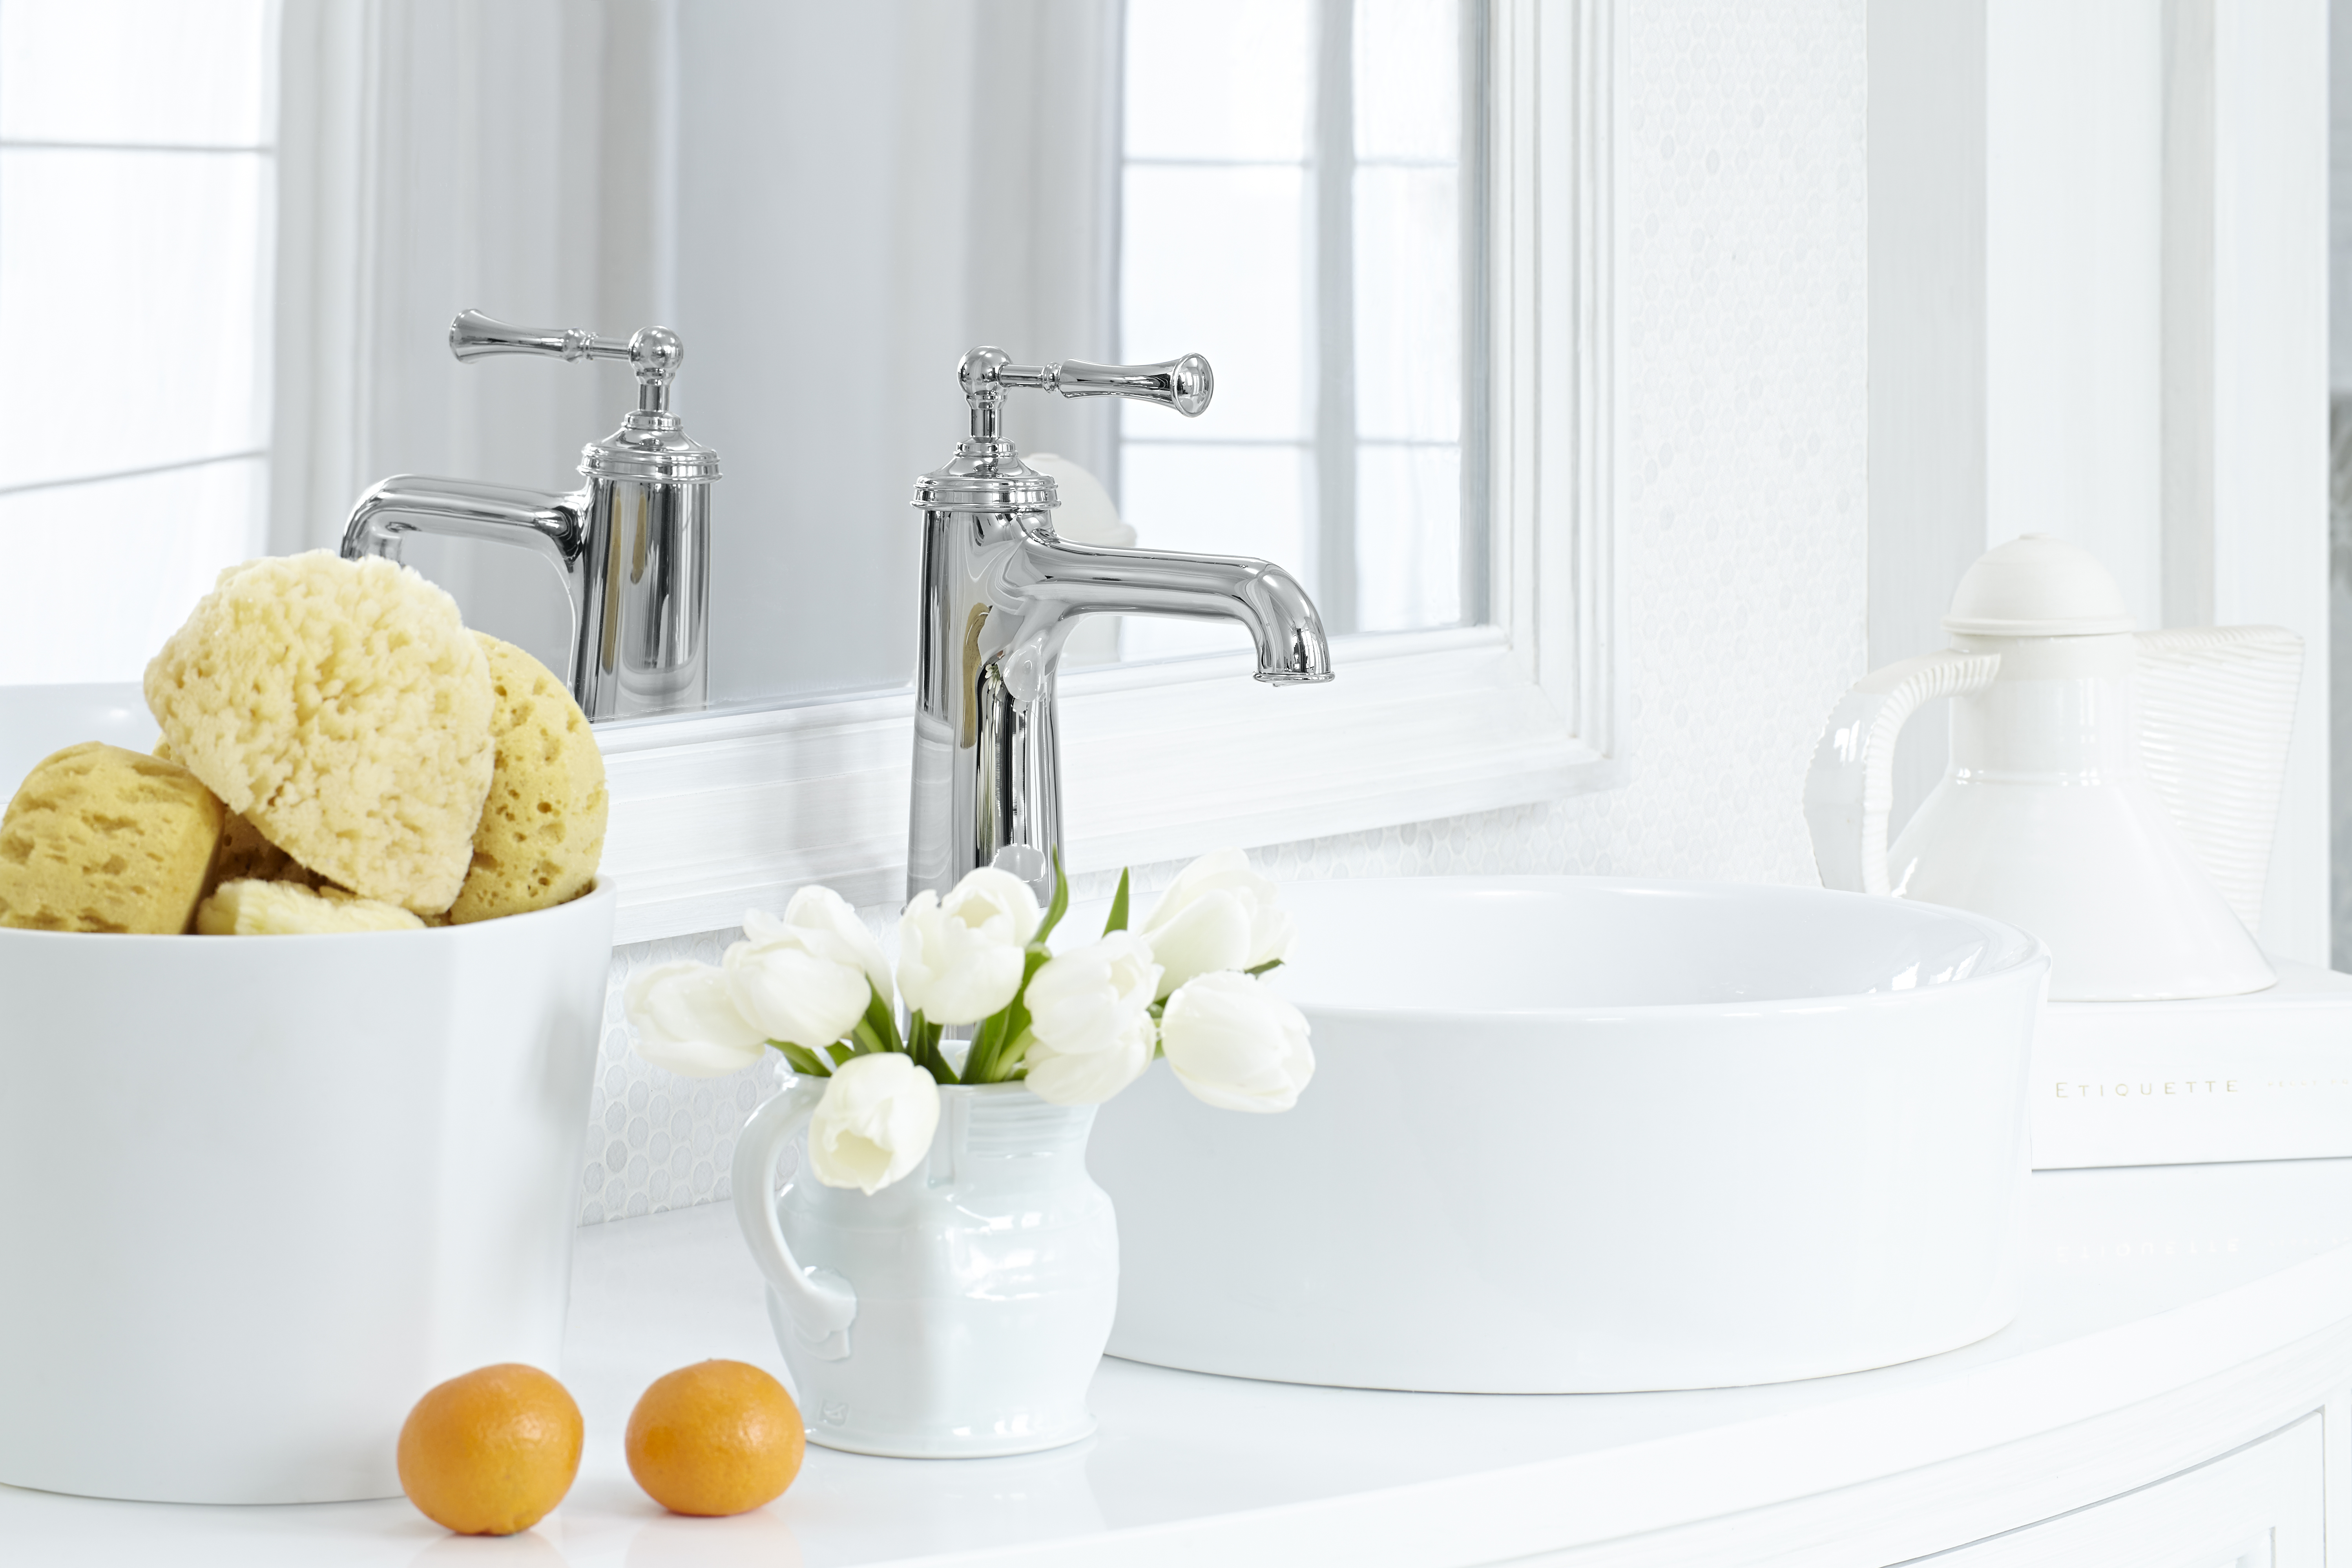 Randall Vessel Faucet without Drain